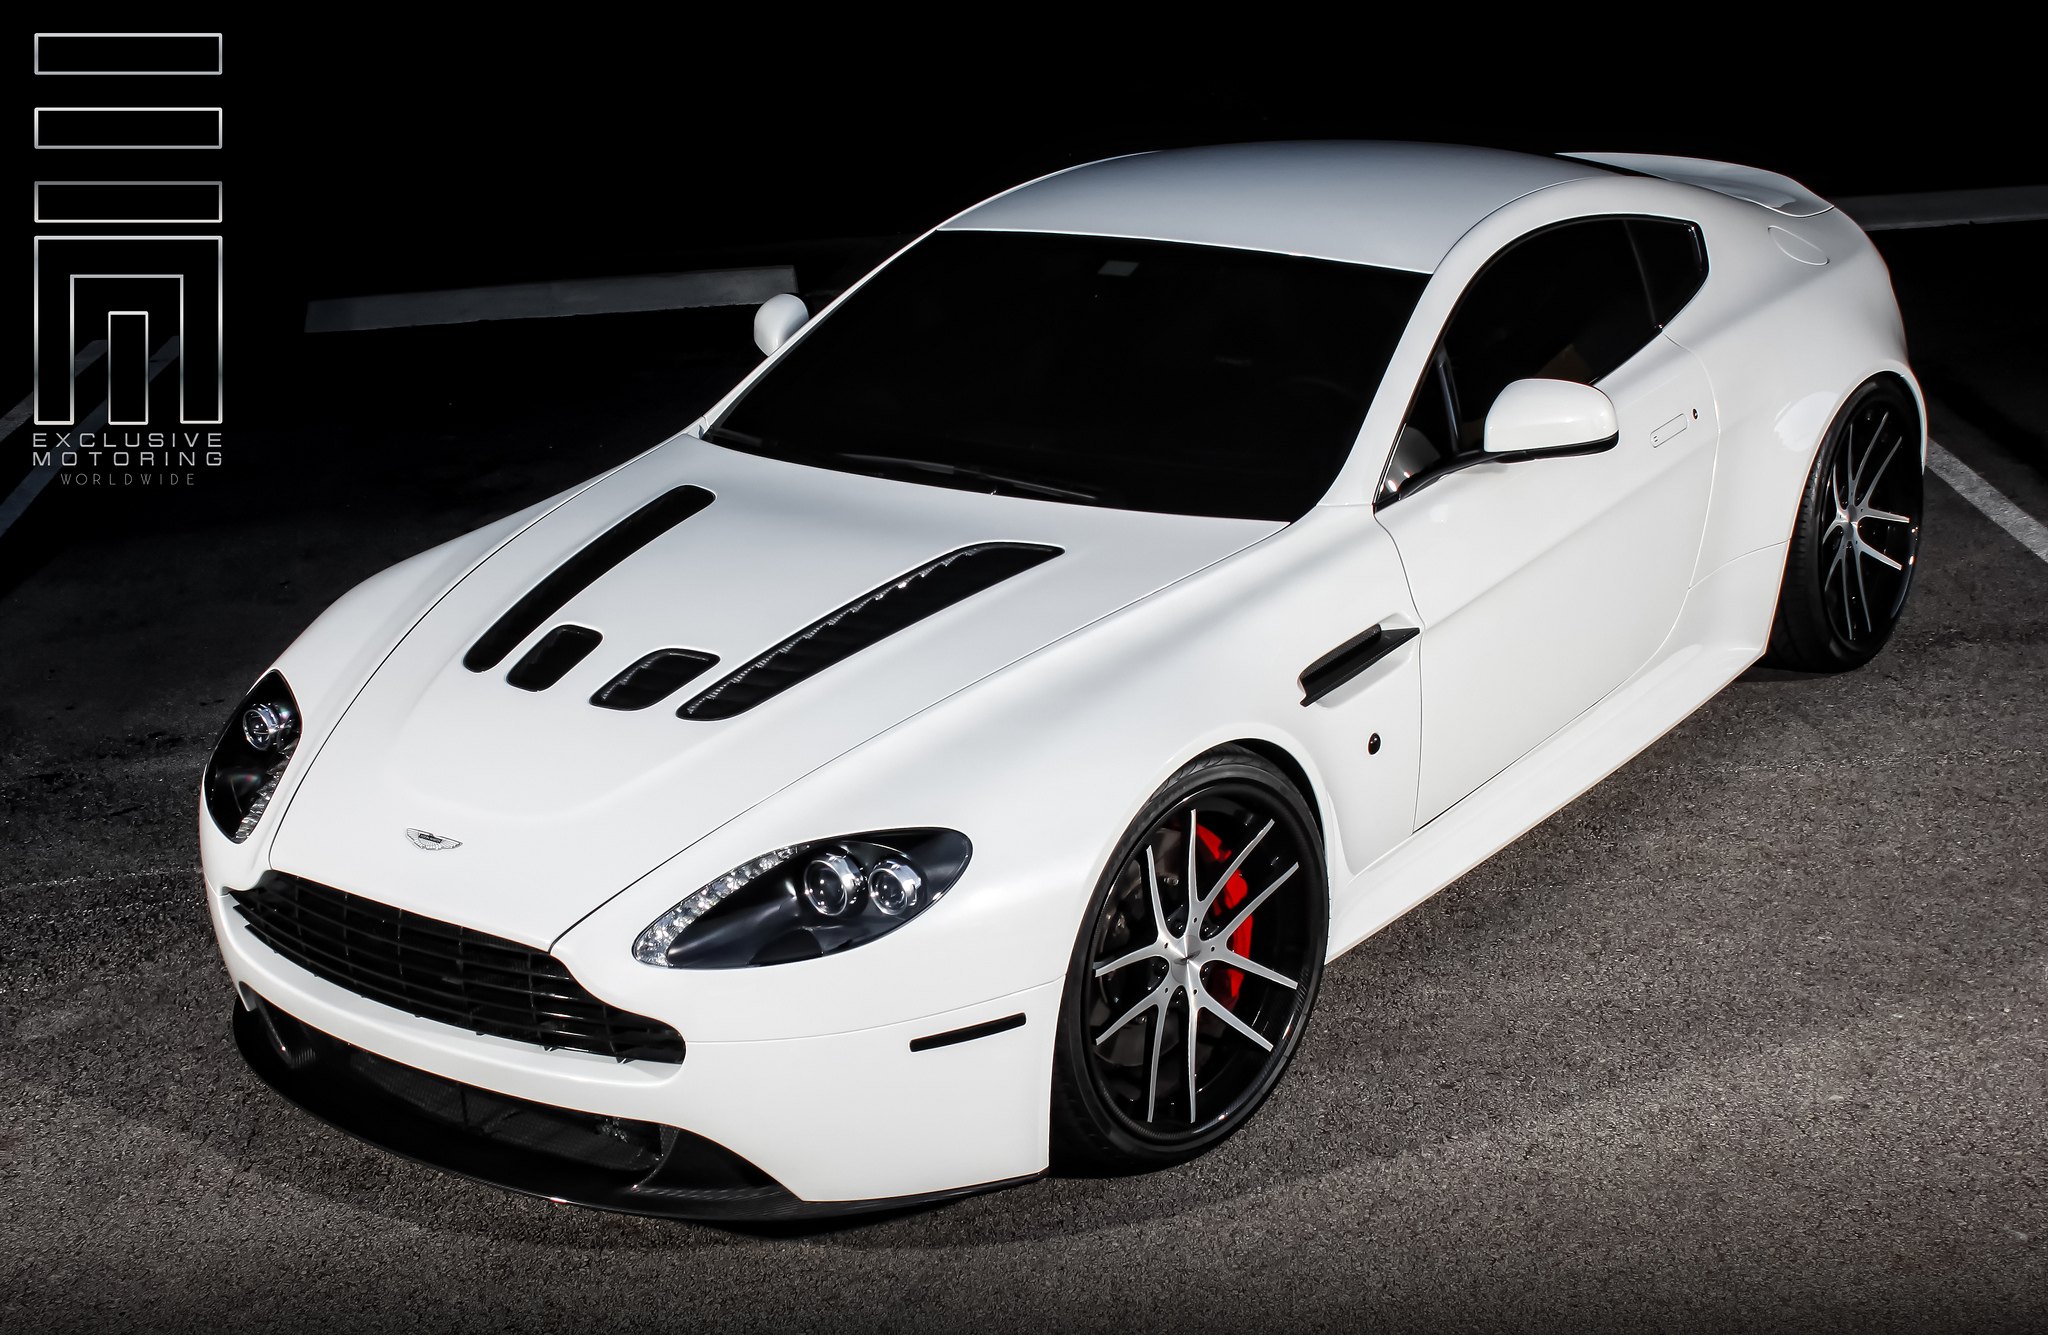 Bespoke Aston Martin featuring Hood Scoops - Photo by Exclusive Motoring